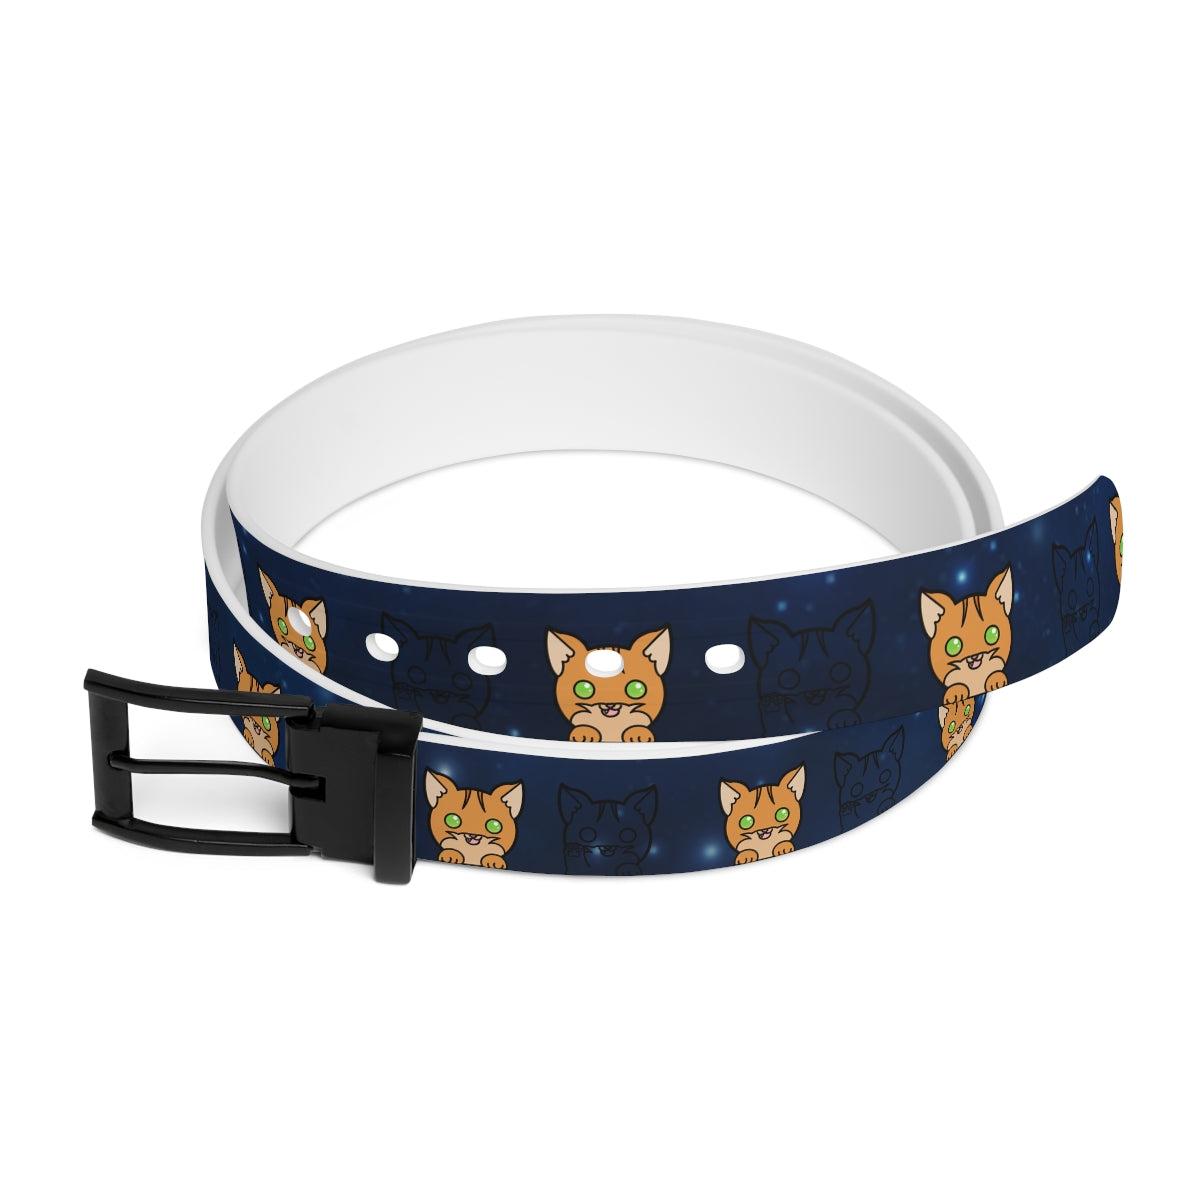 Stand out  with the  Belt  available at Hey Nugget. Grab yours today!